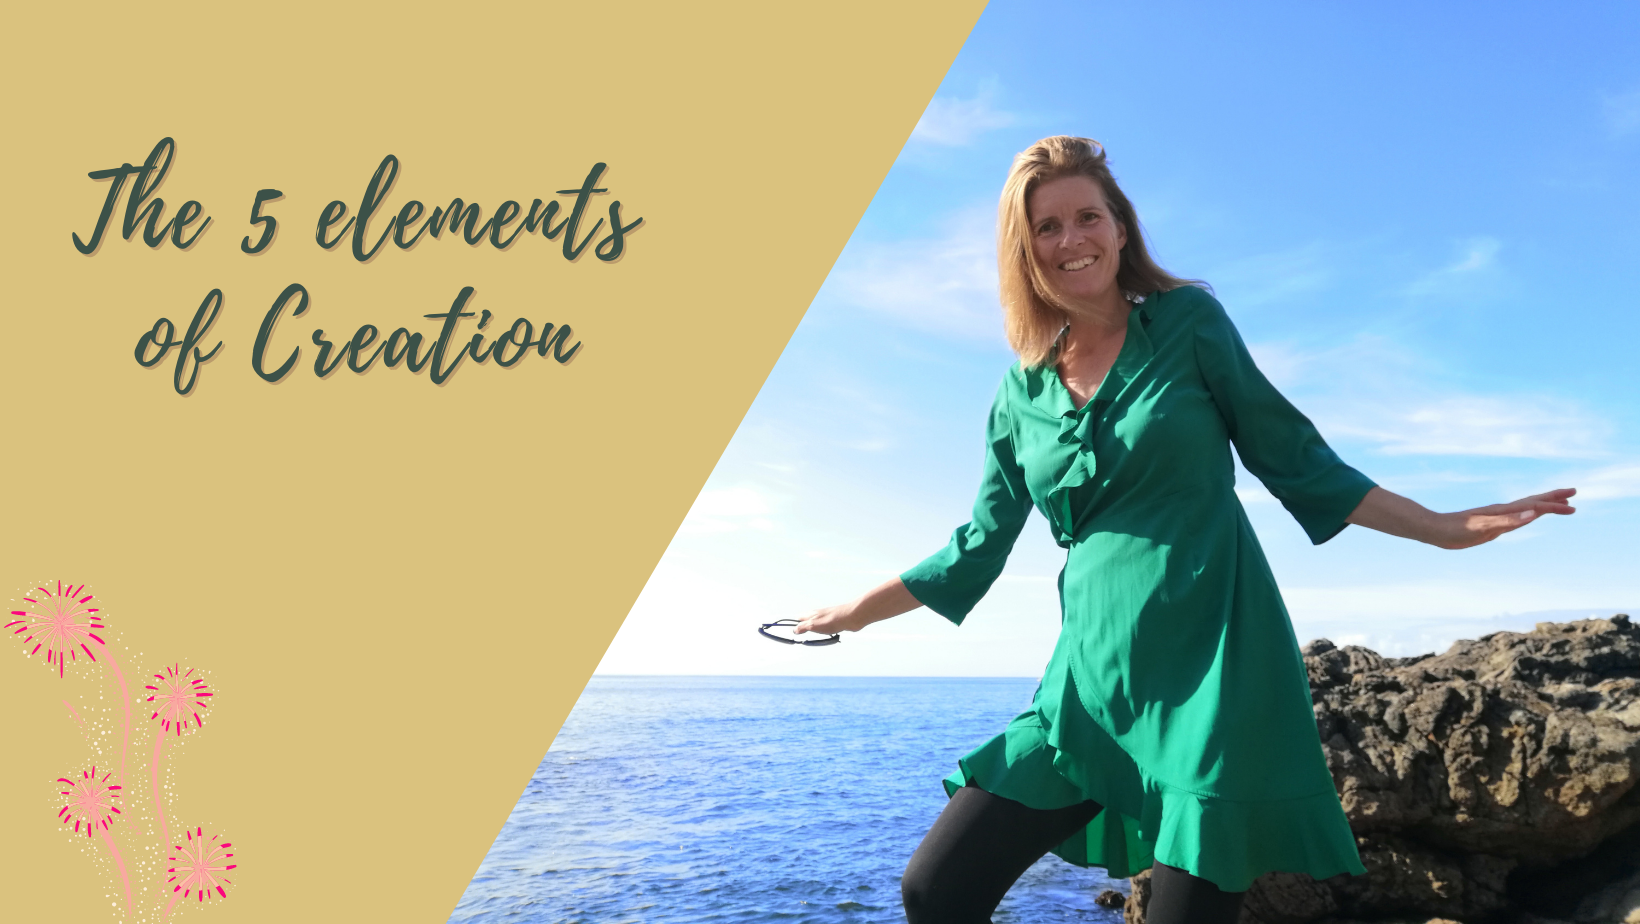 Make your Dream a Reality with the 5 elements of ceation